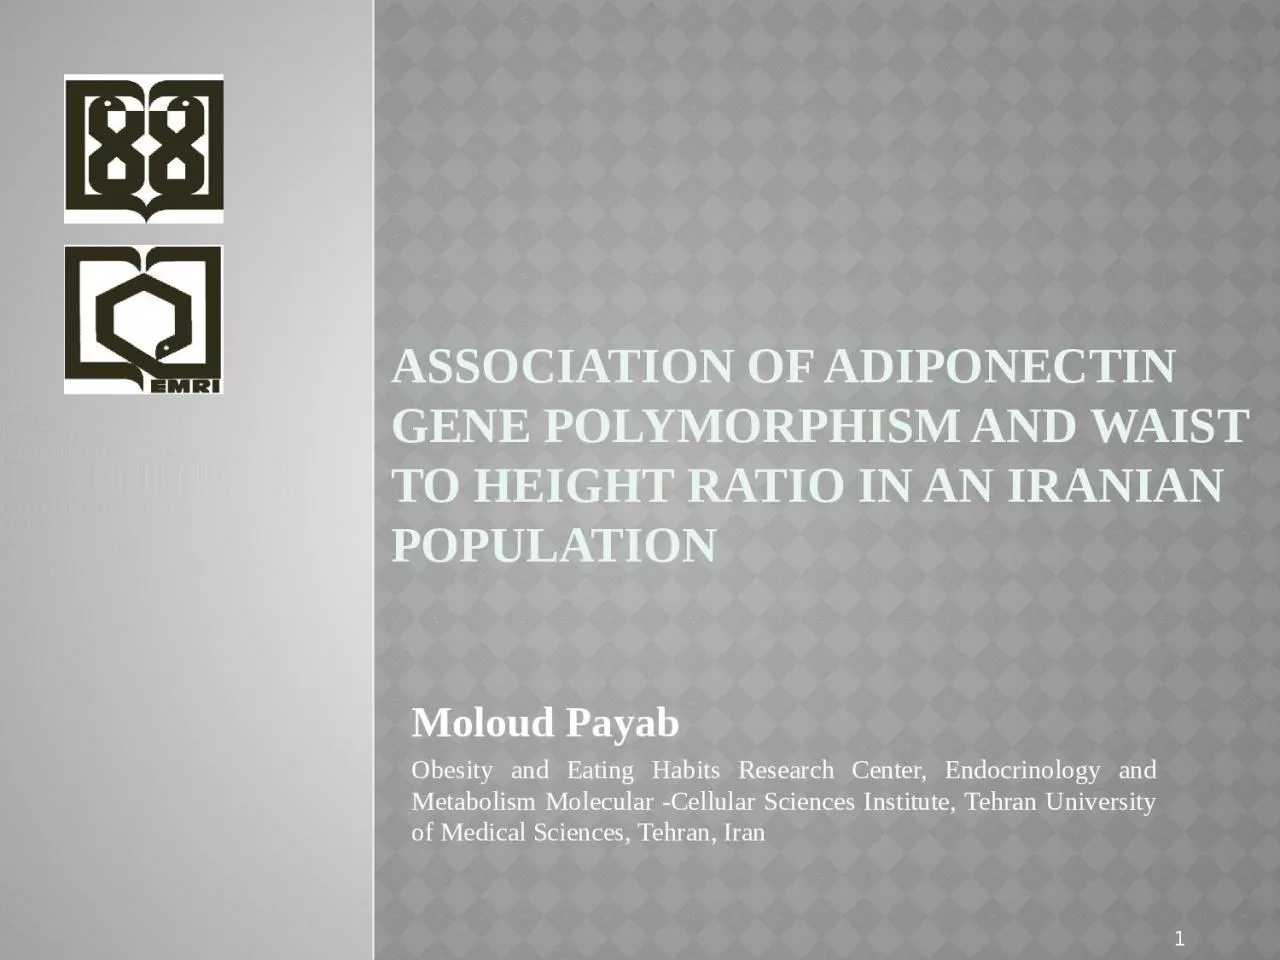 Association of adiponectin gene polymorphism and waist to height ratio in an Iranian population